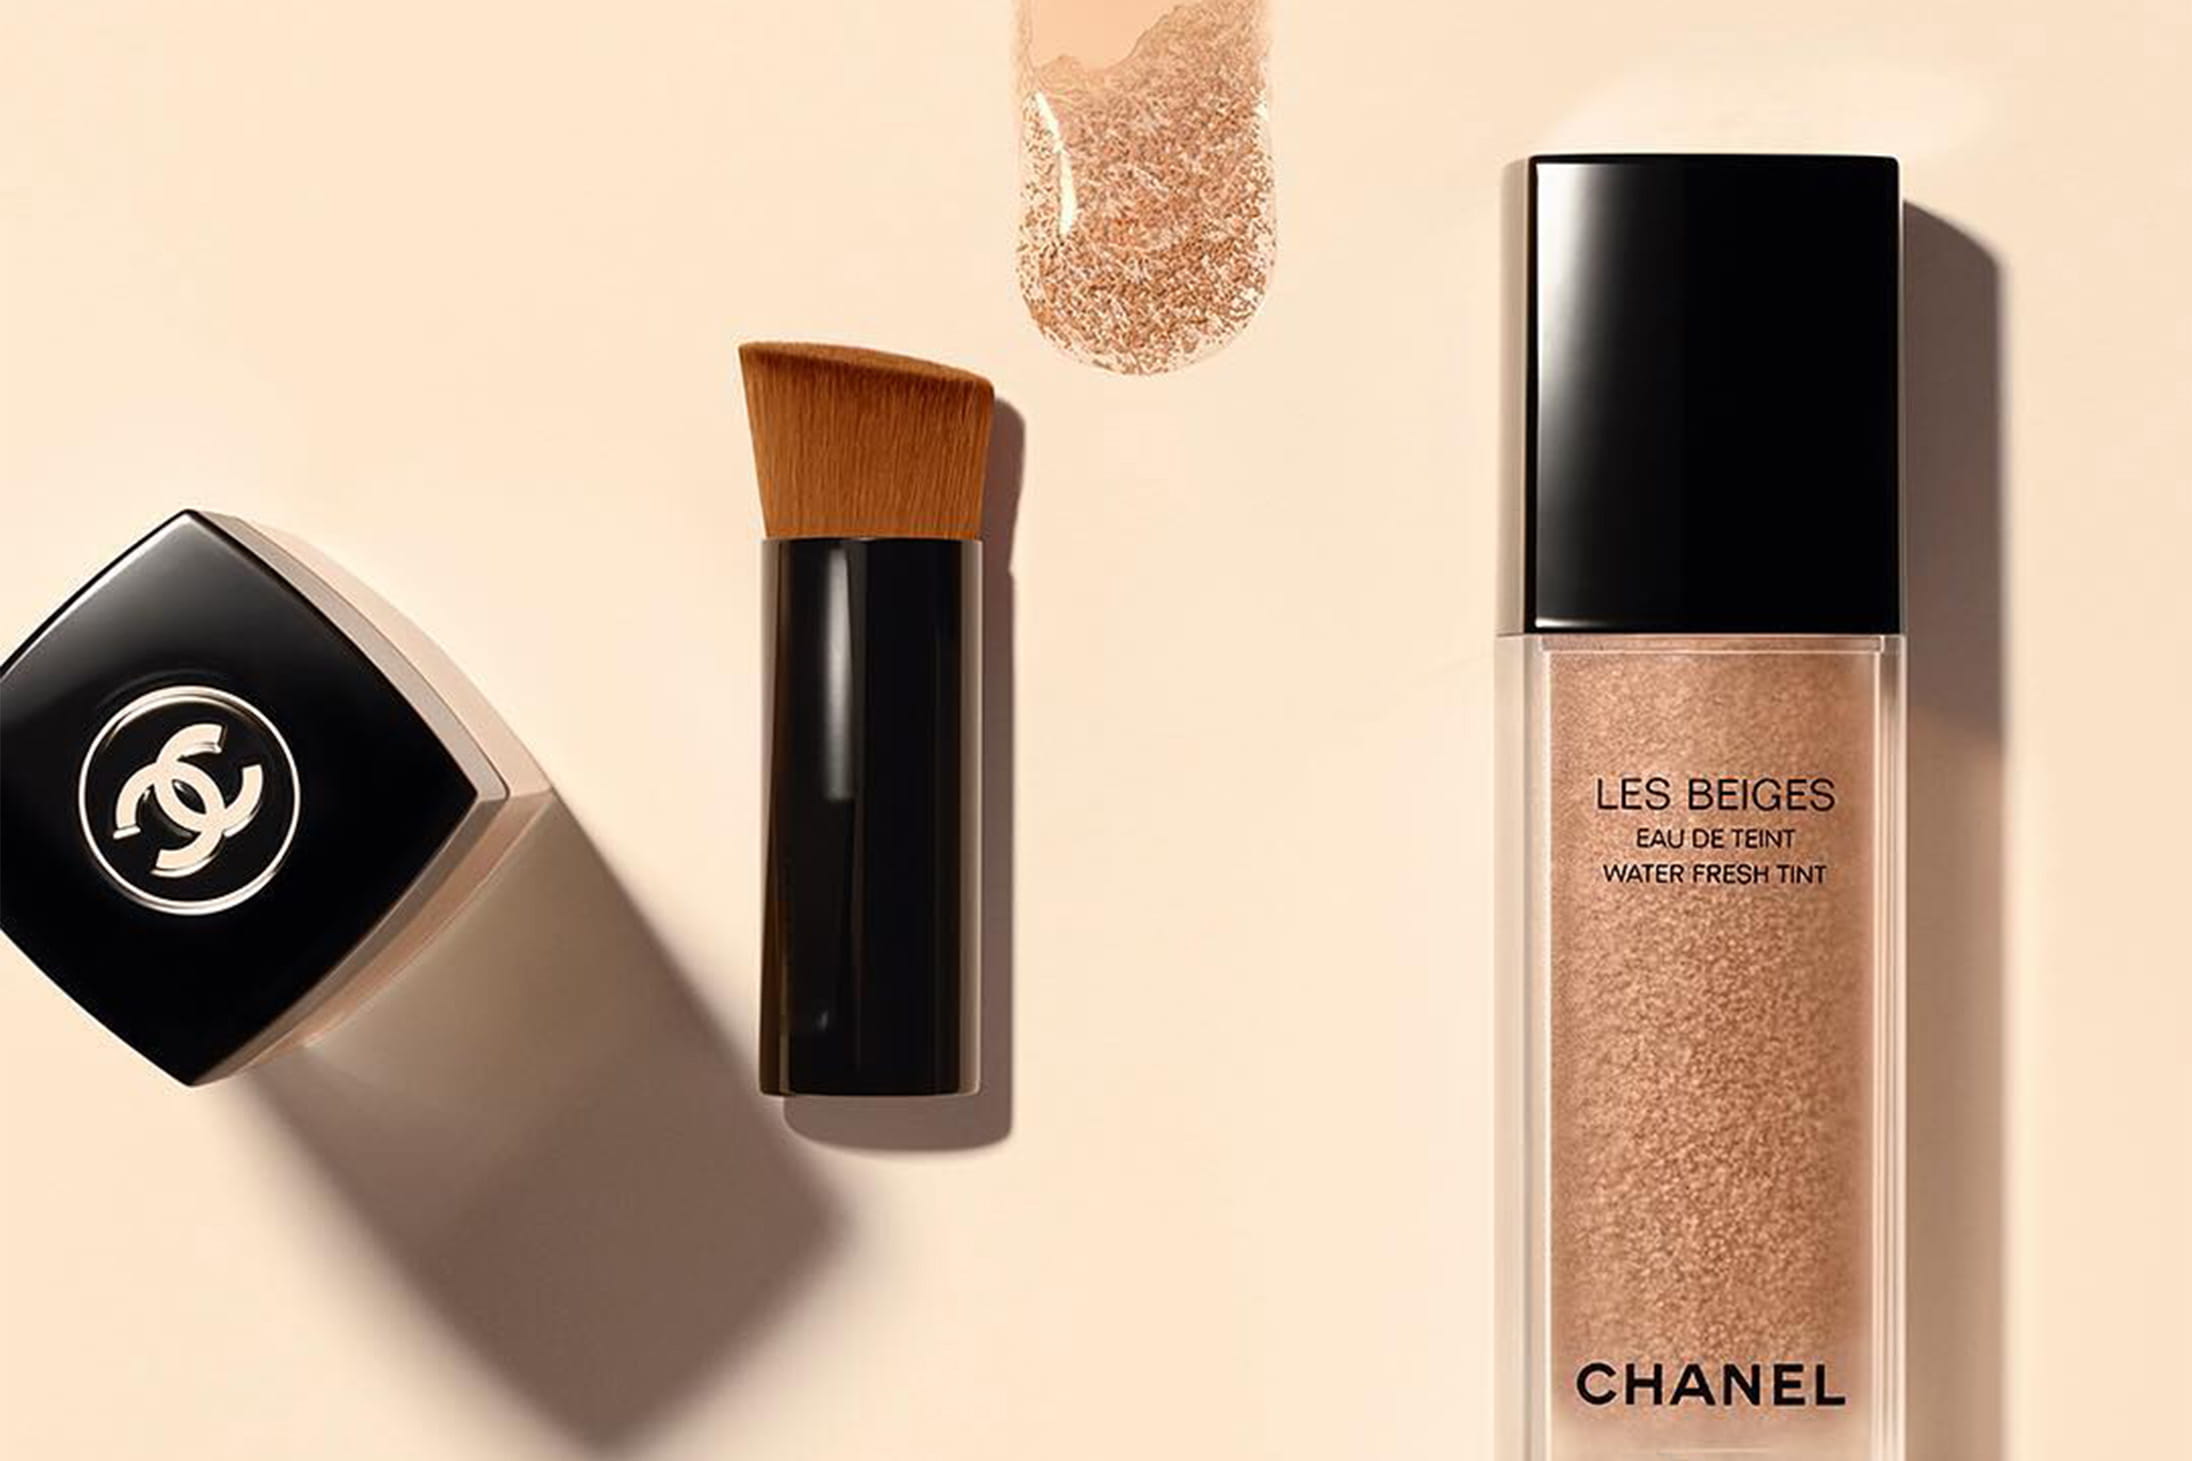 Chanel Beauty Les Beiges Water-Fresh Tint